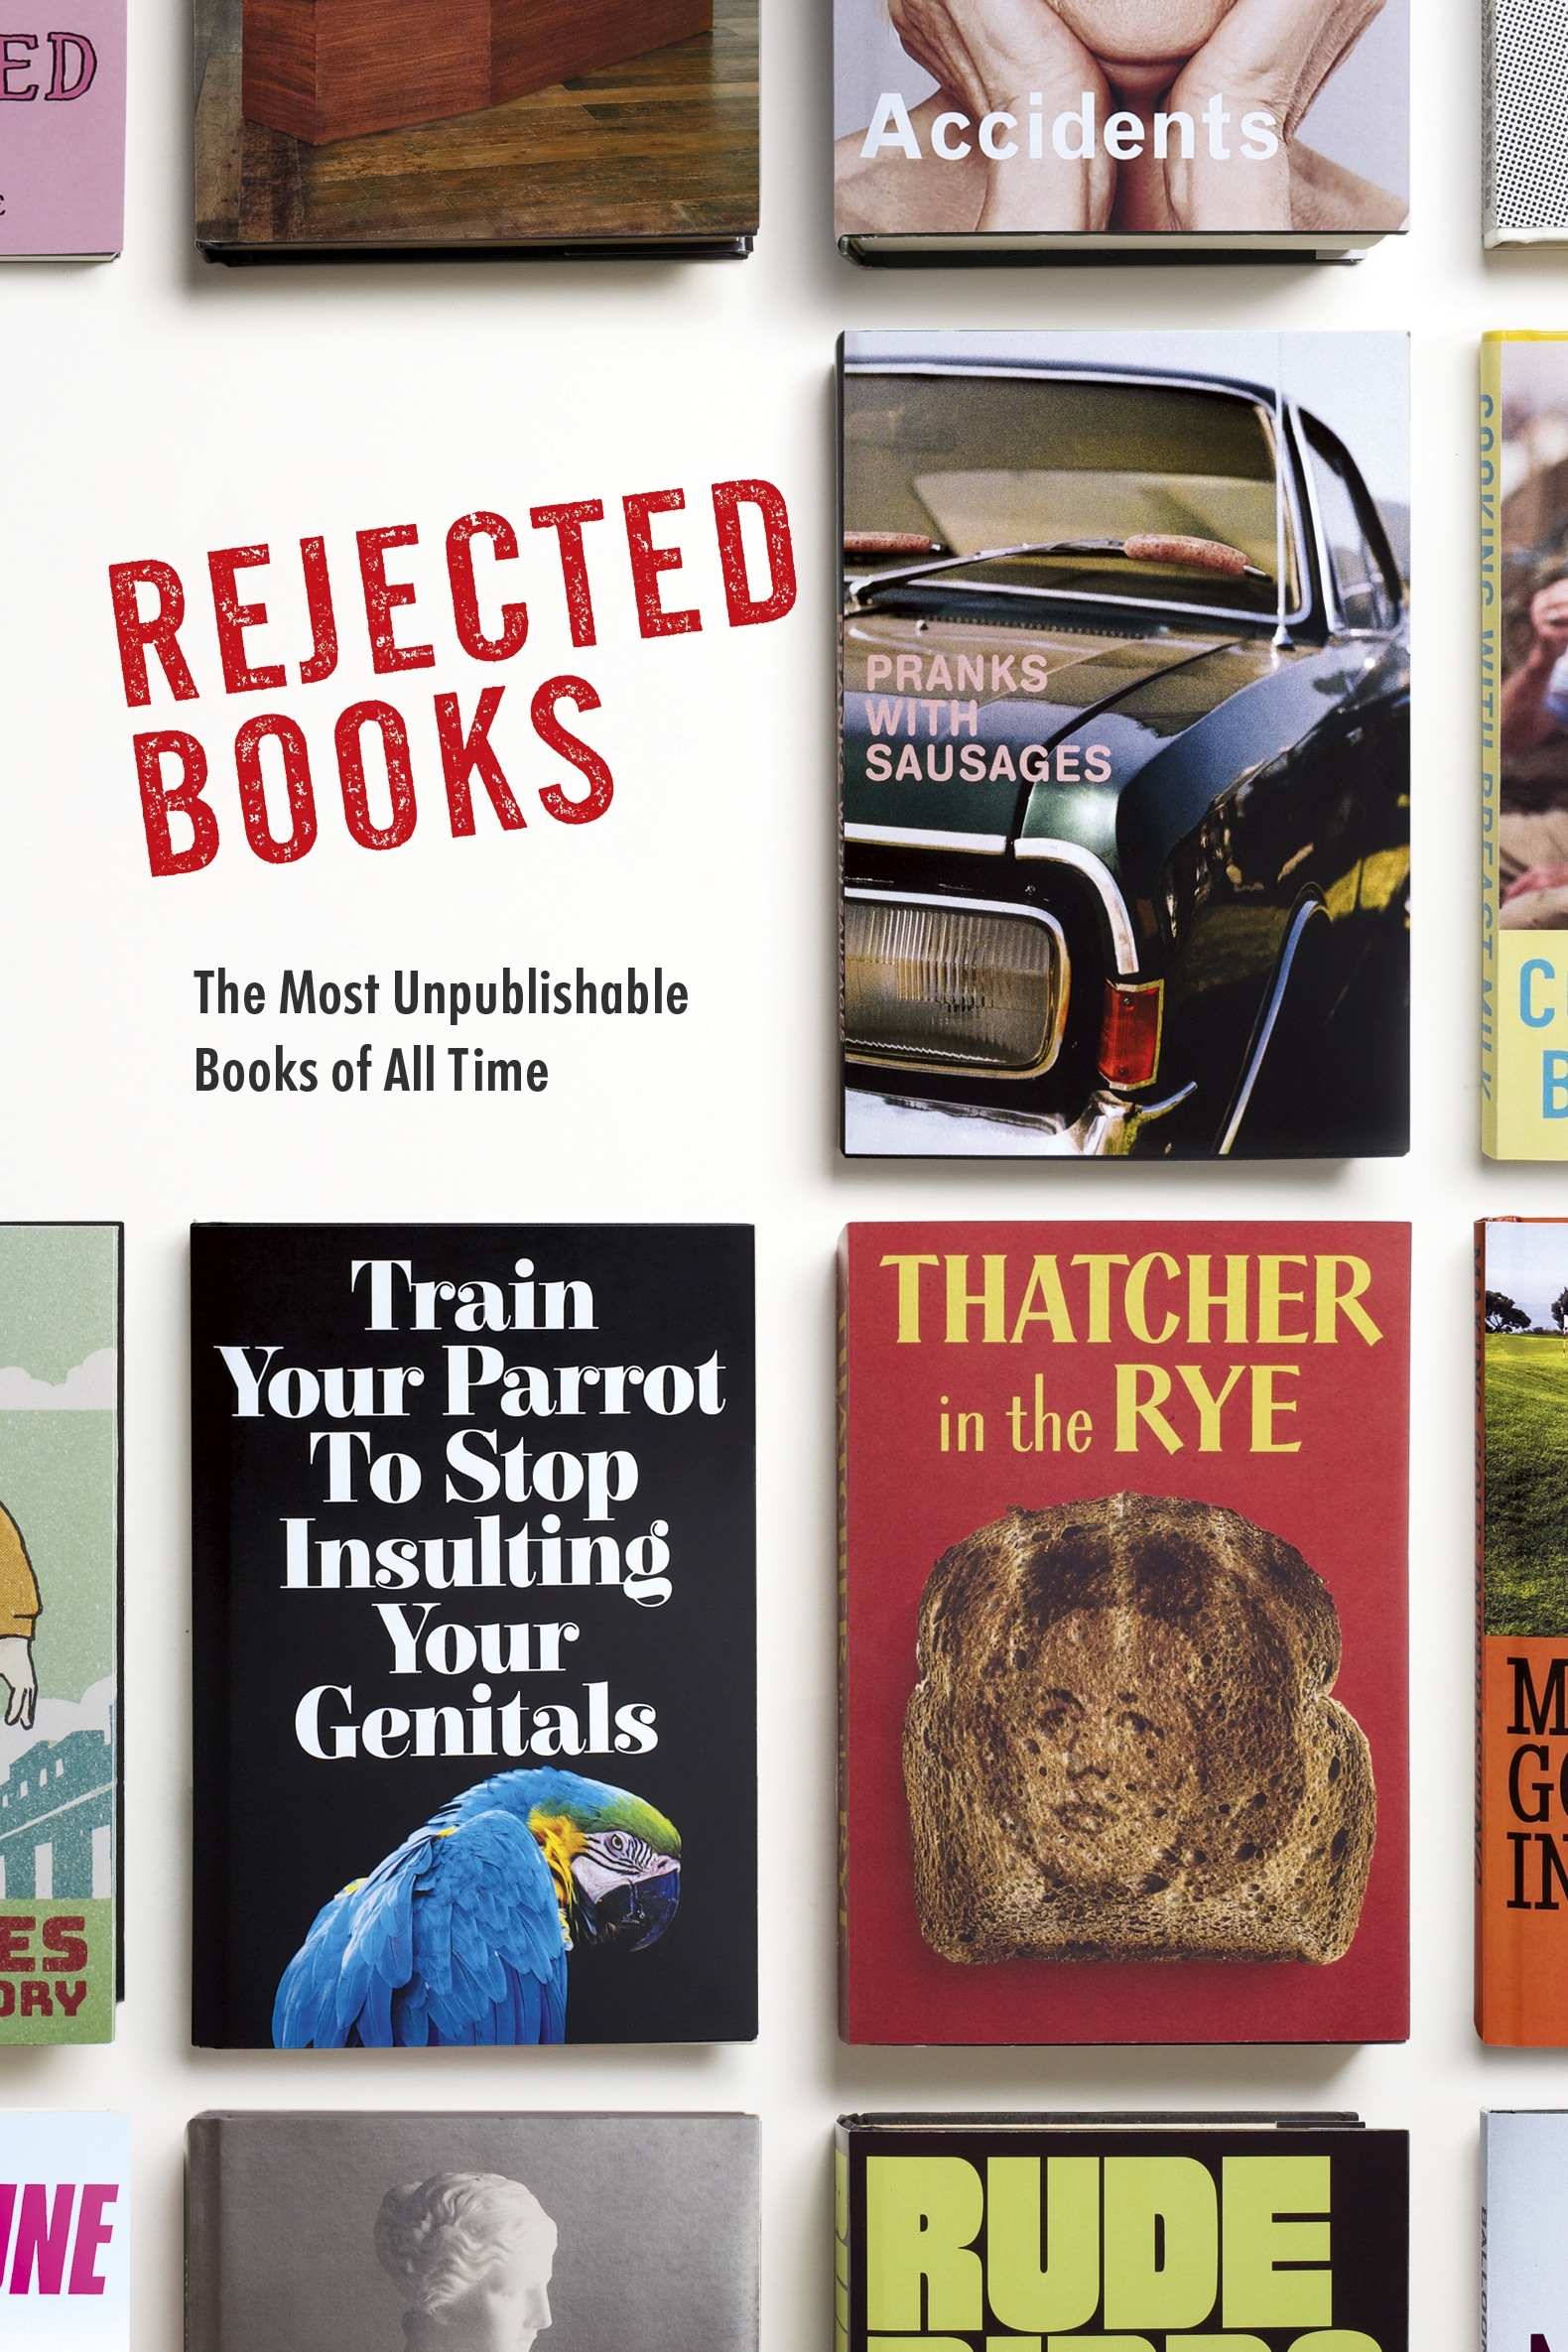 Book “Rejected Books” by Graham Johnson, Rob Hibbert — October 27, 2022